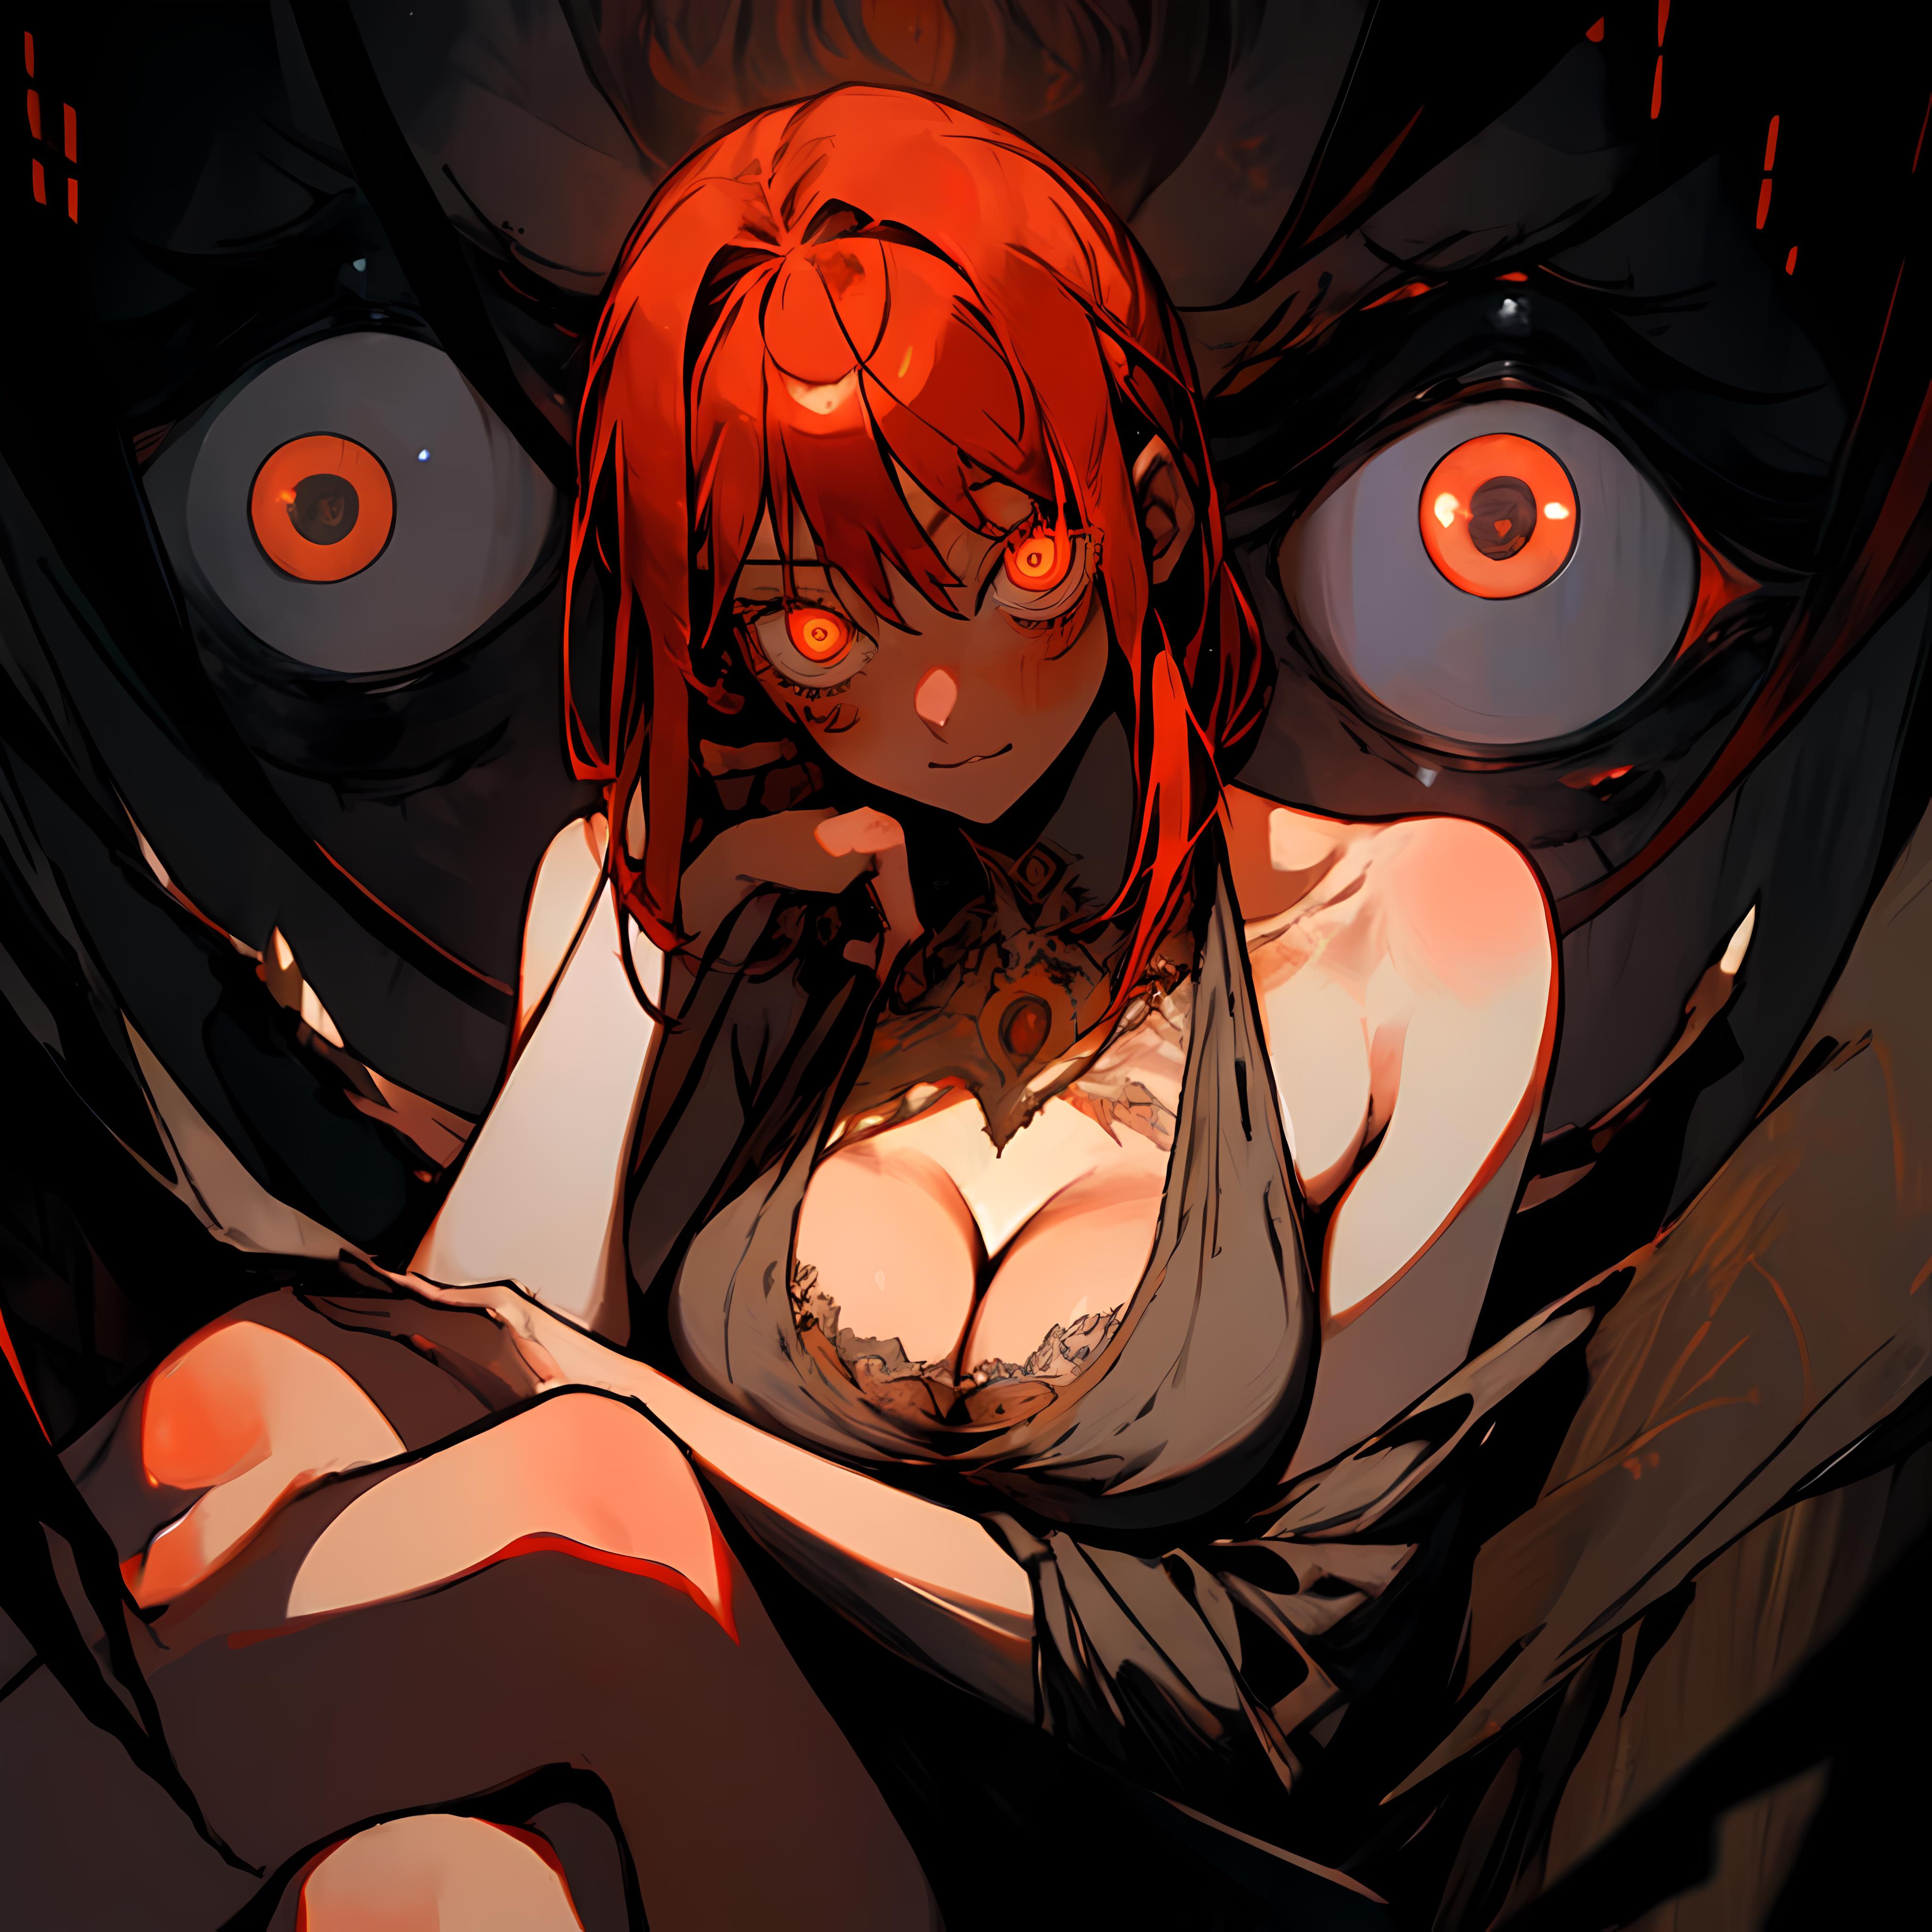 A woman with red hair is sitting in front of a monster with glowing eyes.